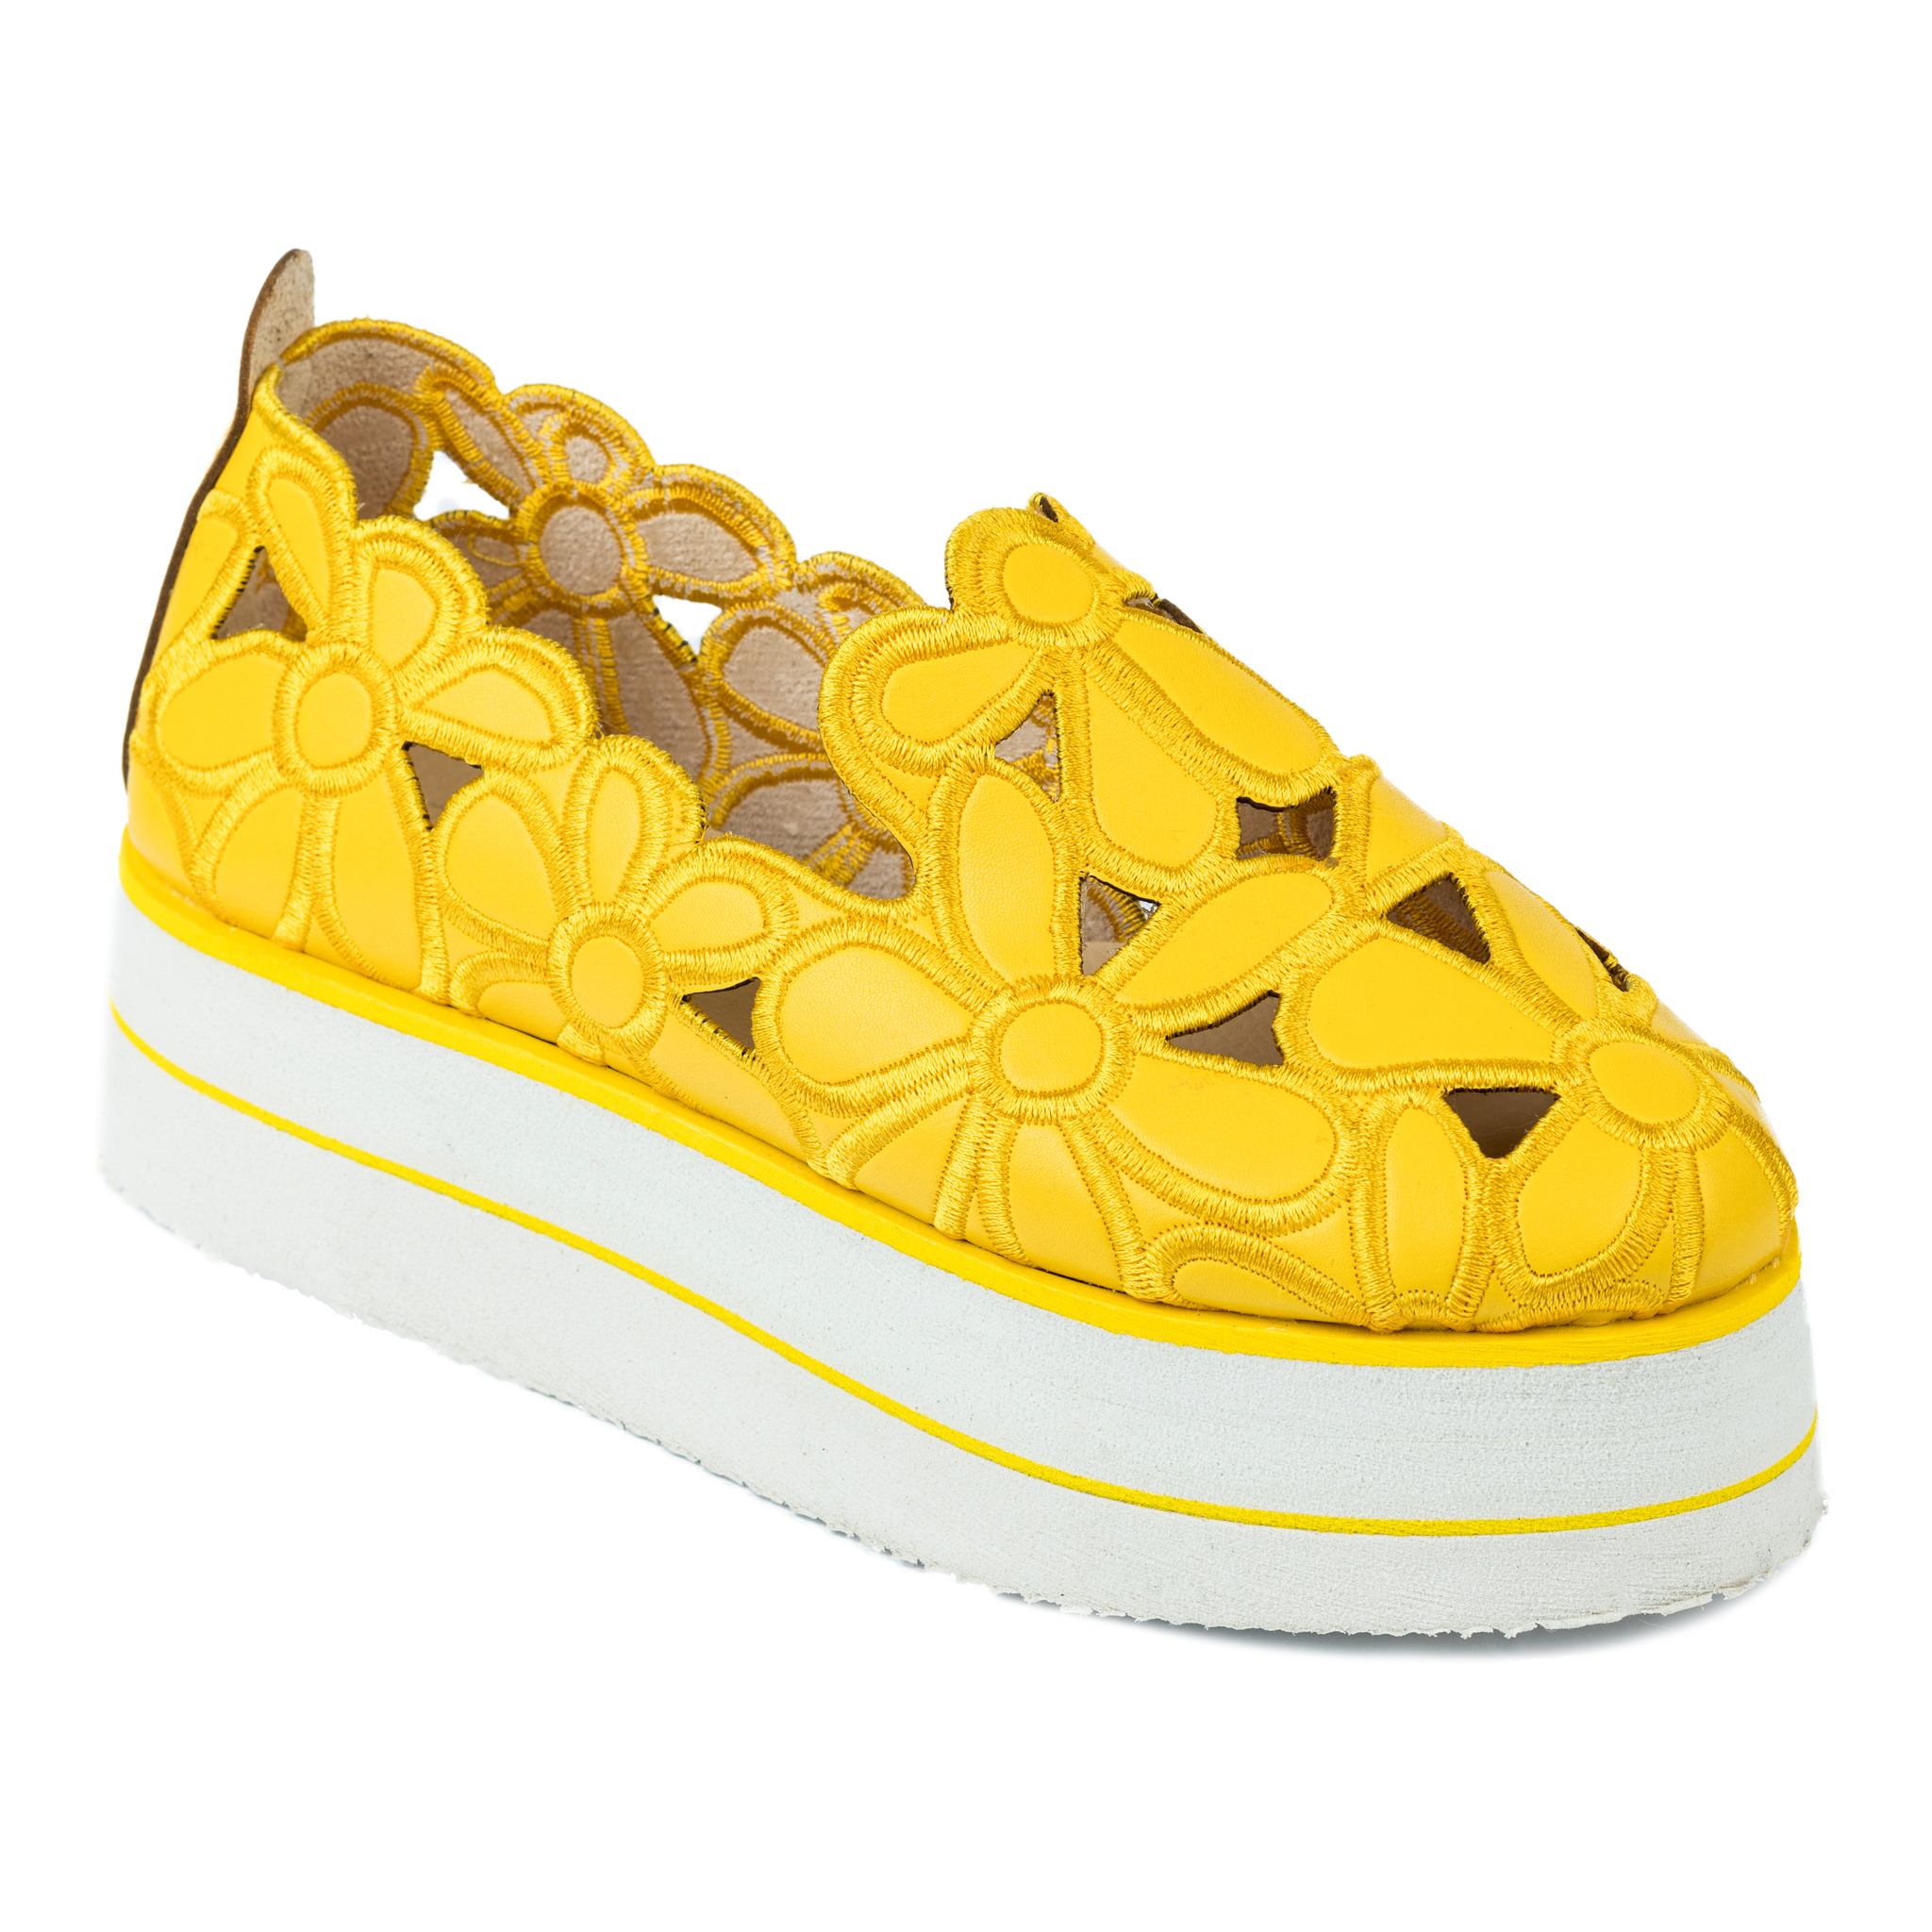 SHOES WITH HIGH SOLE AND FLOWER PRINT - YELLOW